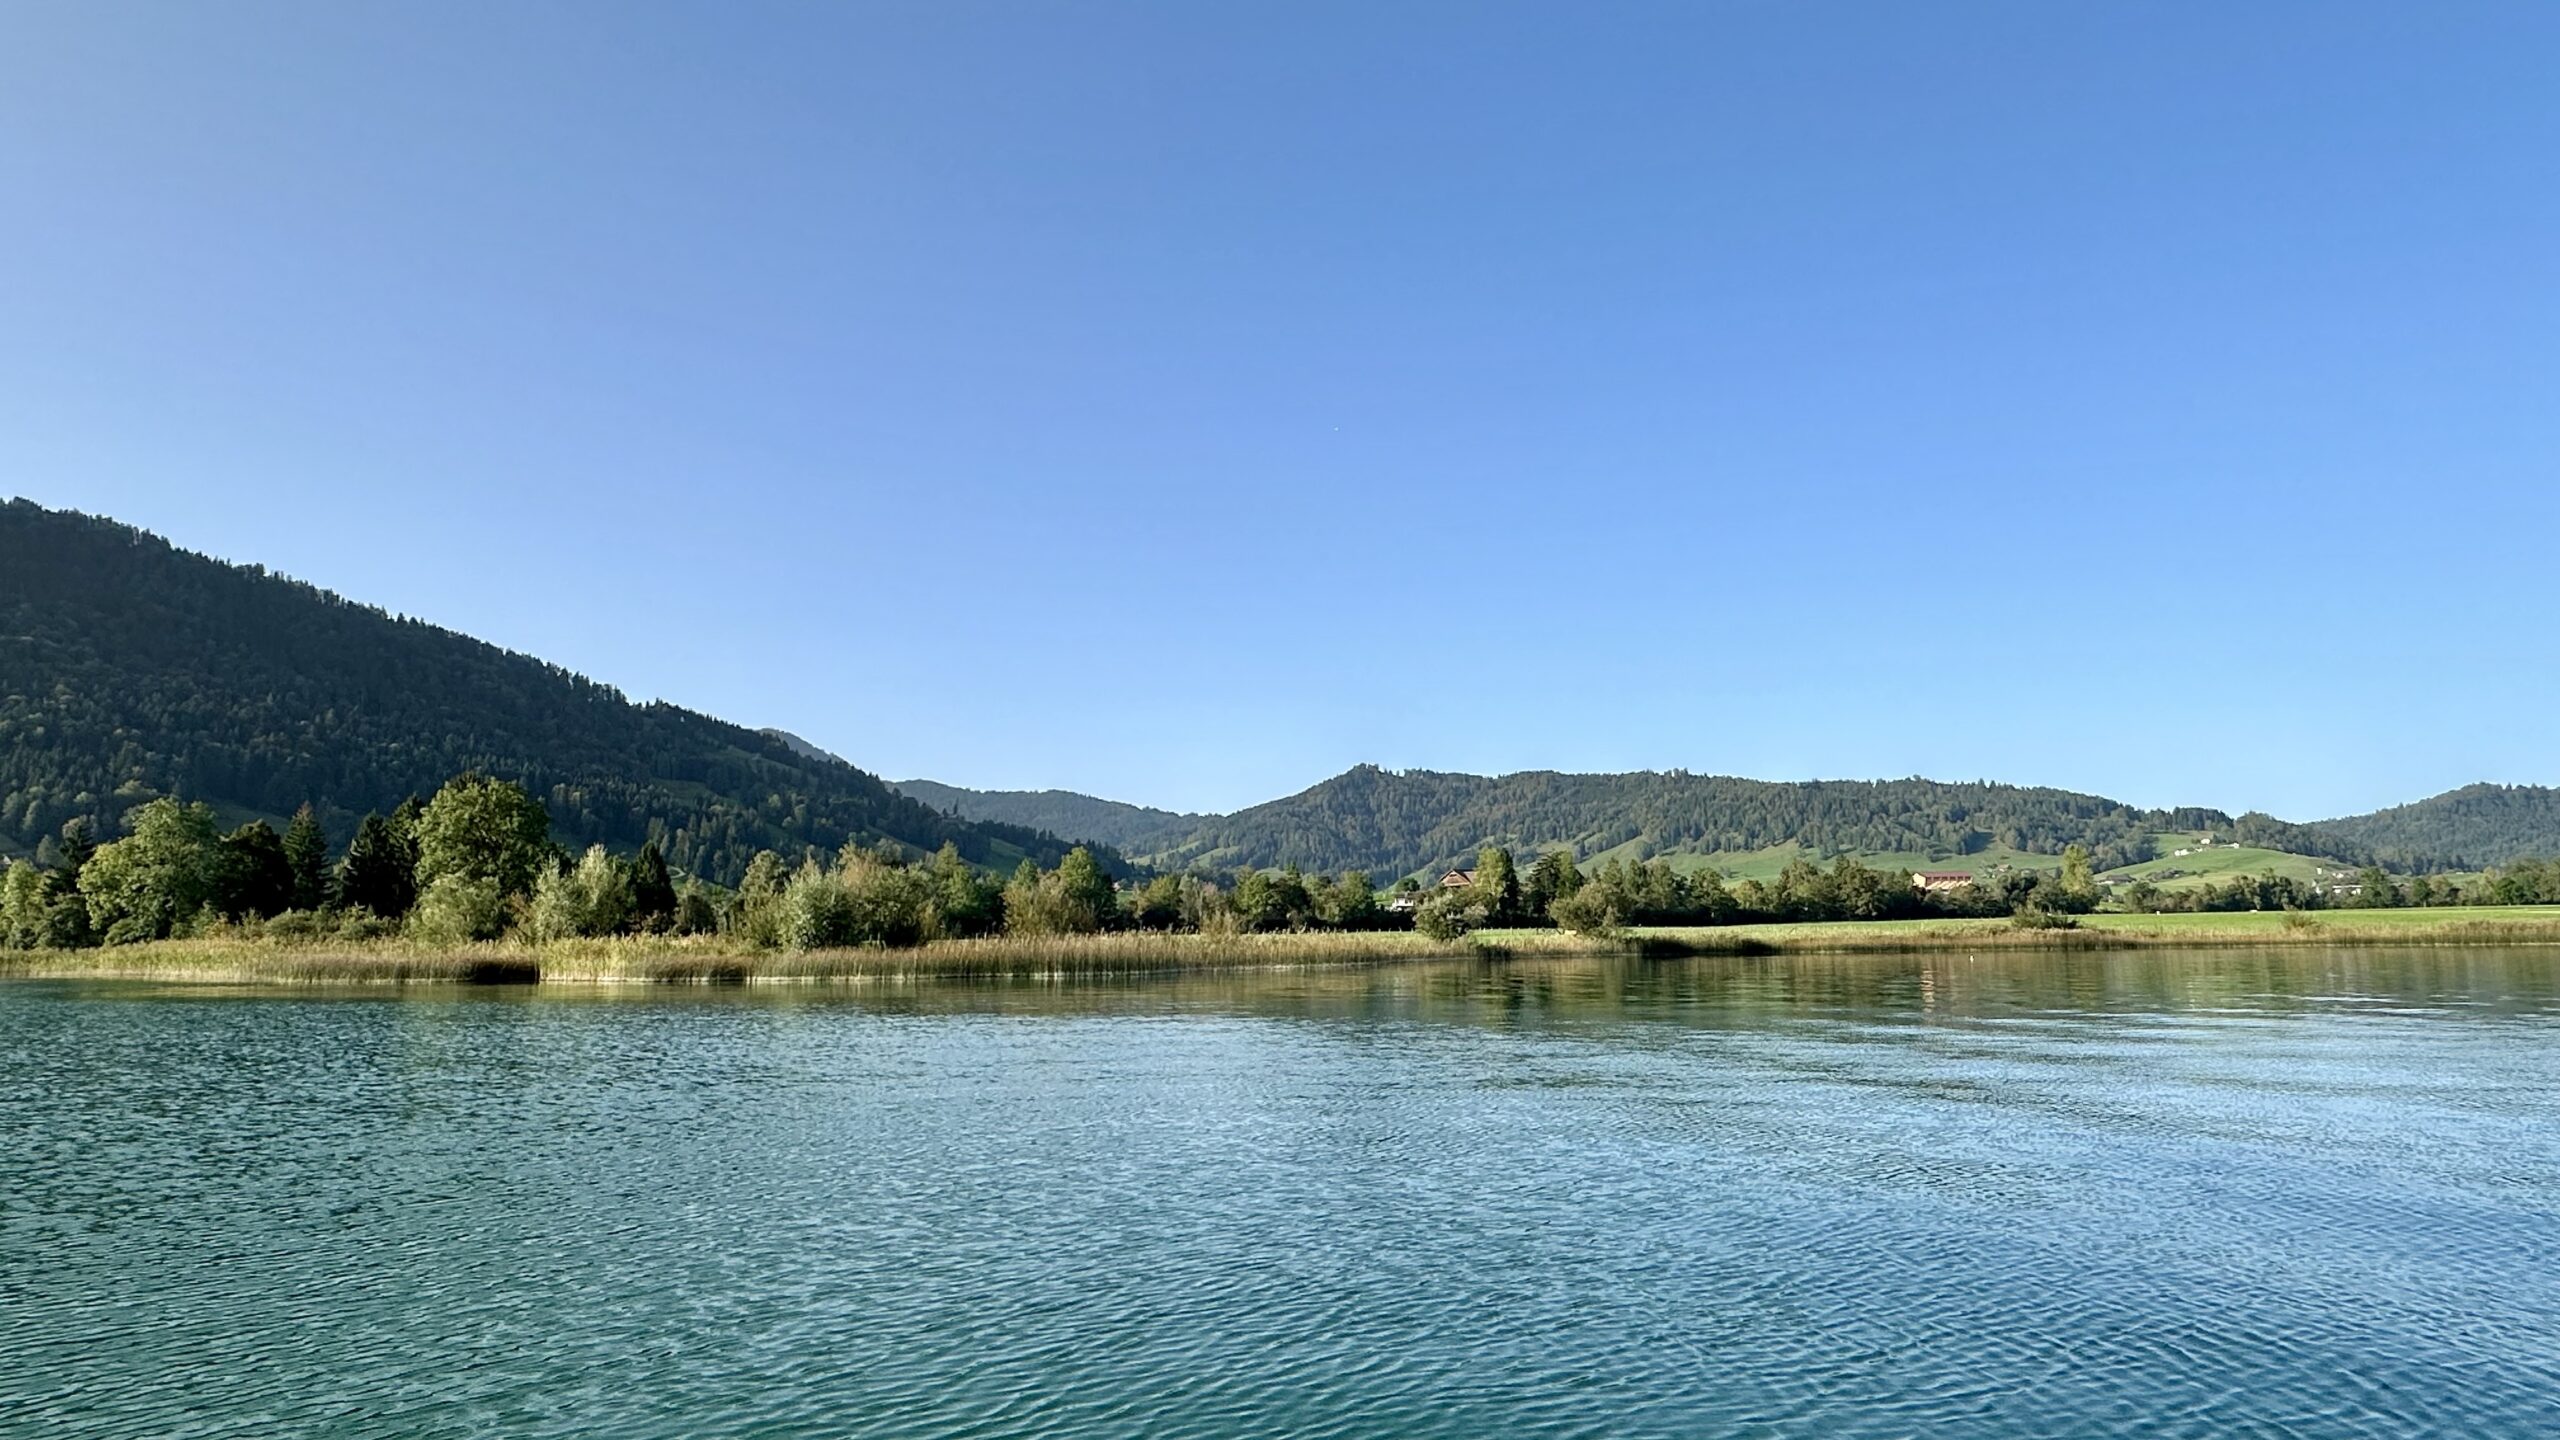 A blue lake with green forested hills in the background under a cloudless blue sky.